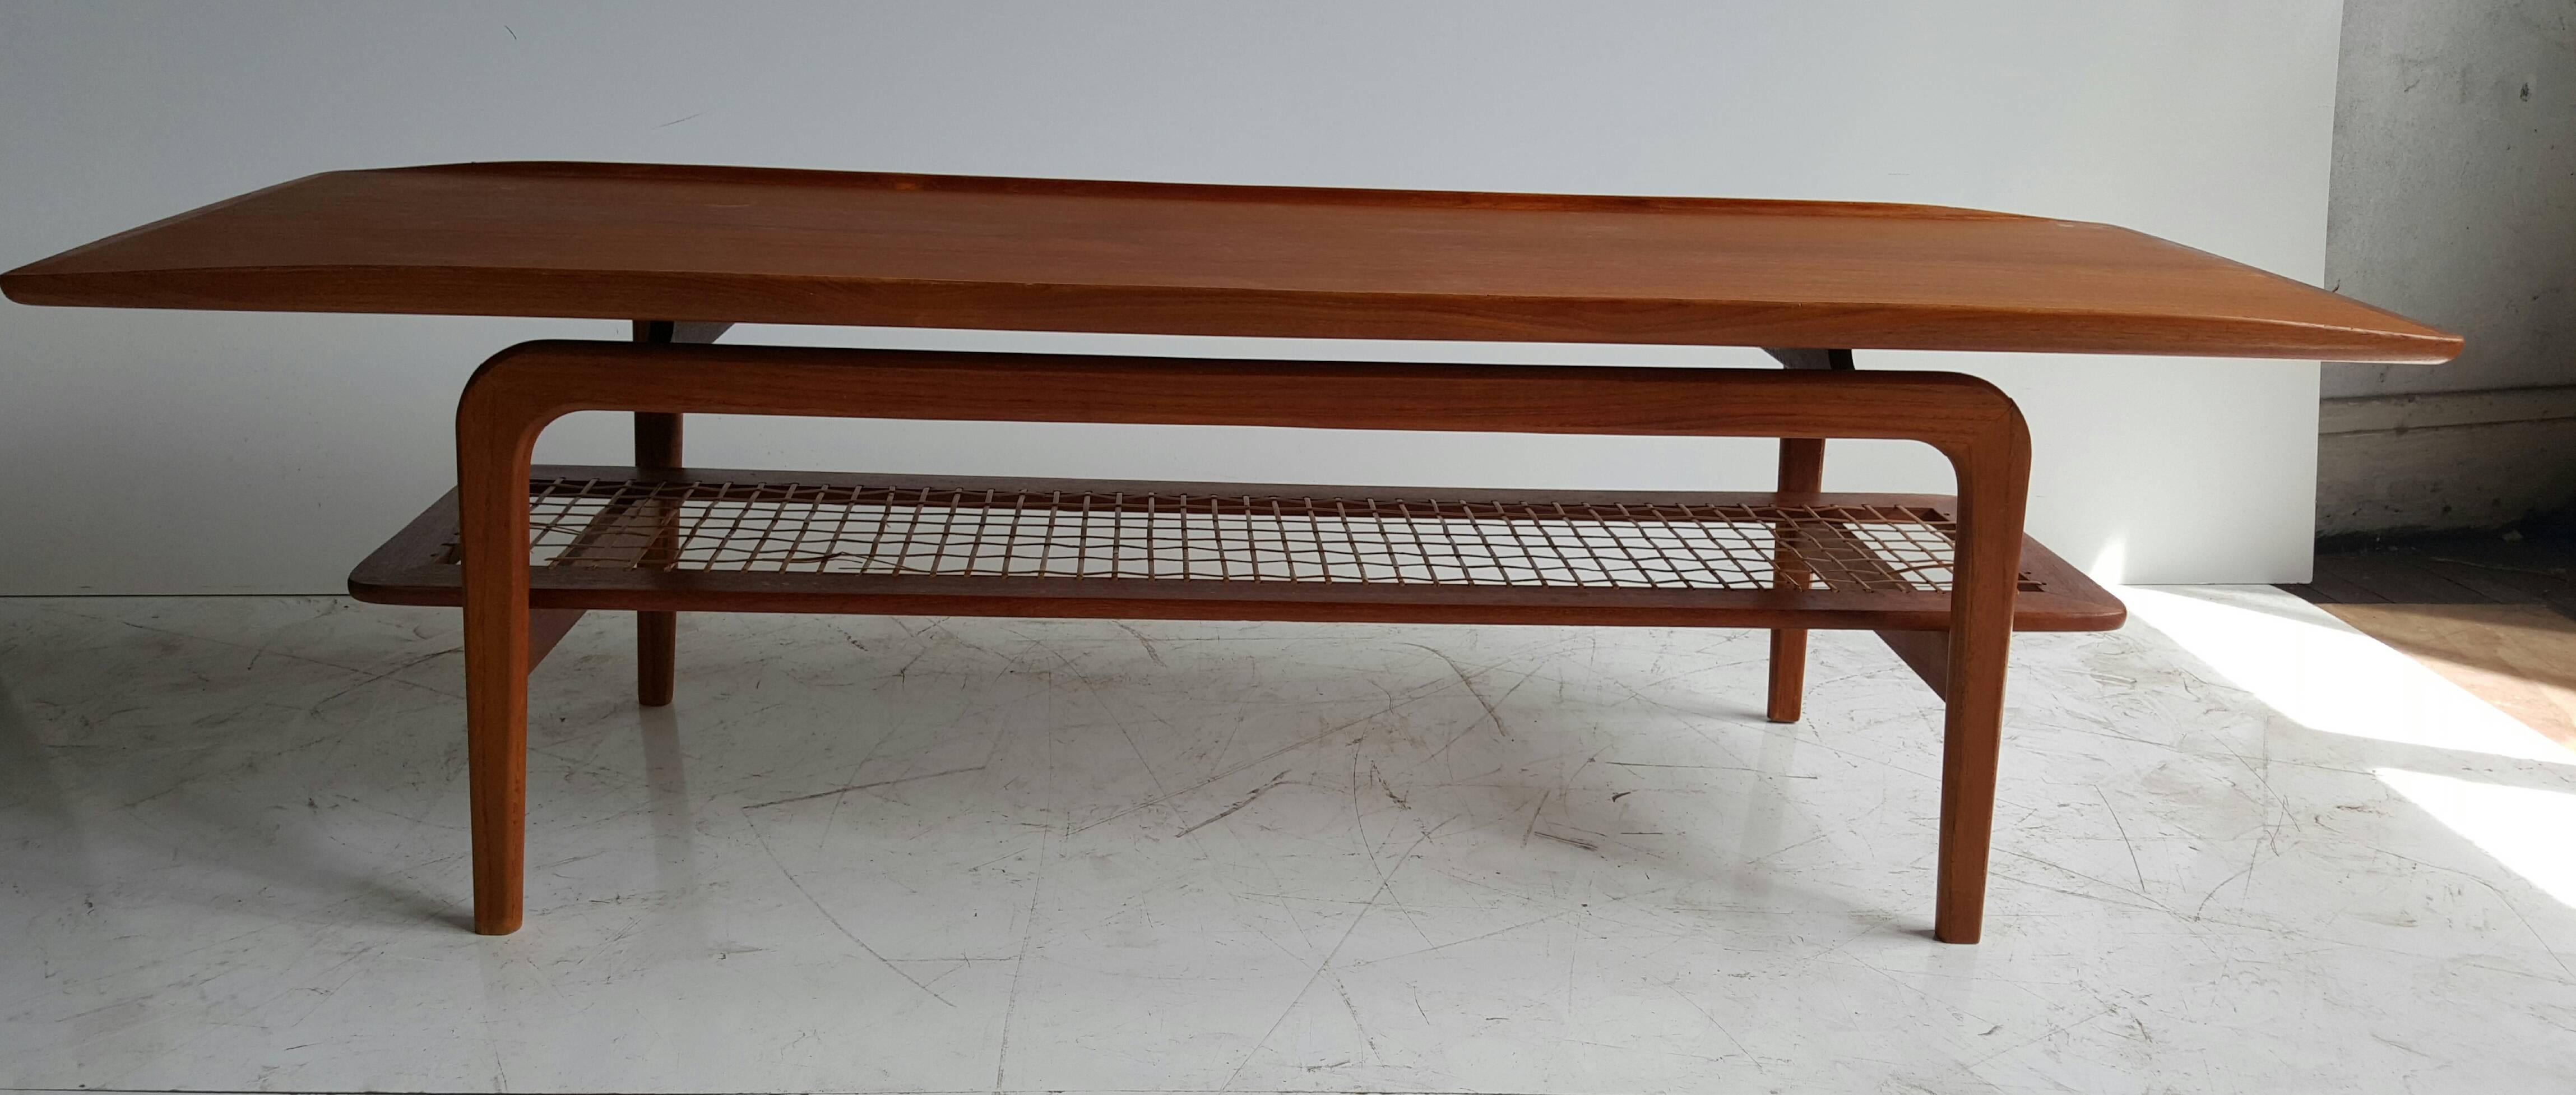 Beautiful vintage Danish coffee table with exquisite grains and colours. Subtle surfboard shape and lip sides to the top with a sturdy feel that contrasts nicely with lower tier shelf